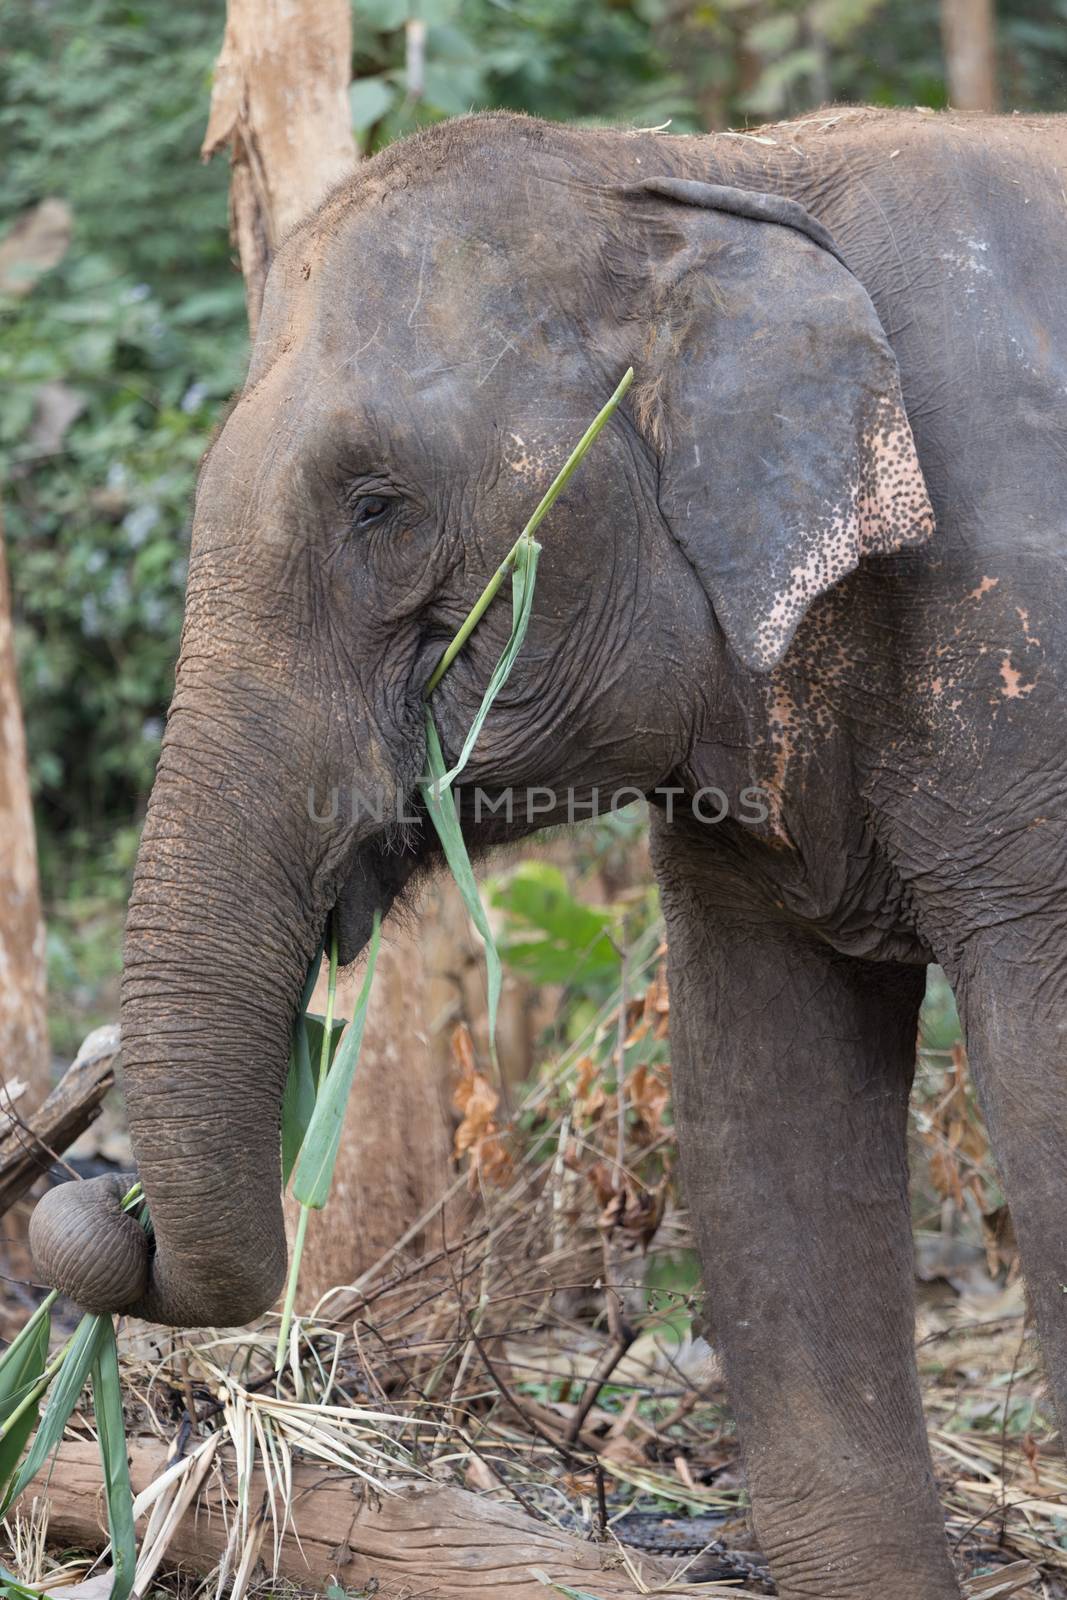 Elephant standing under tree in Laos elephant sanctuary by kgboxford